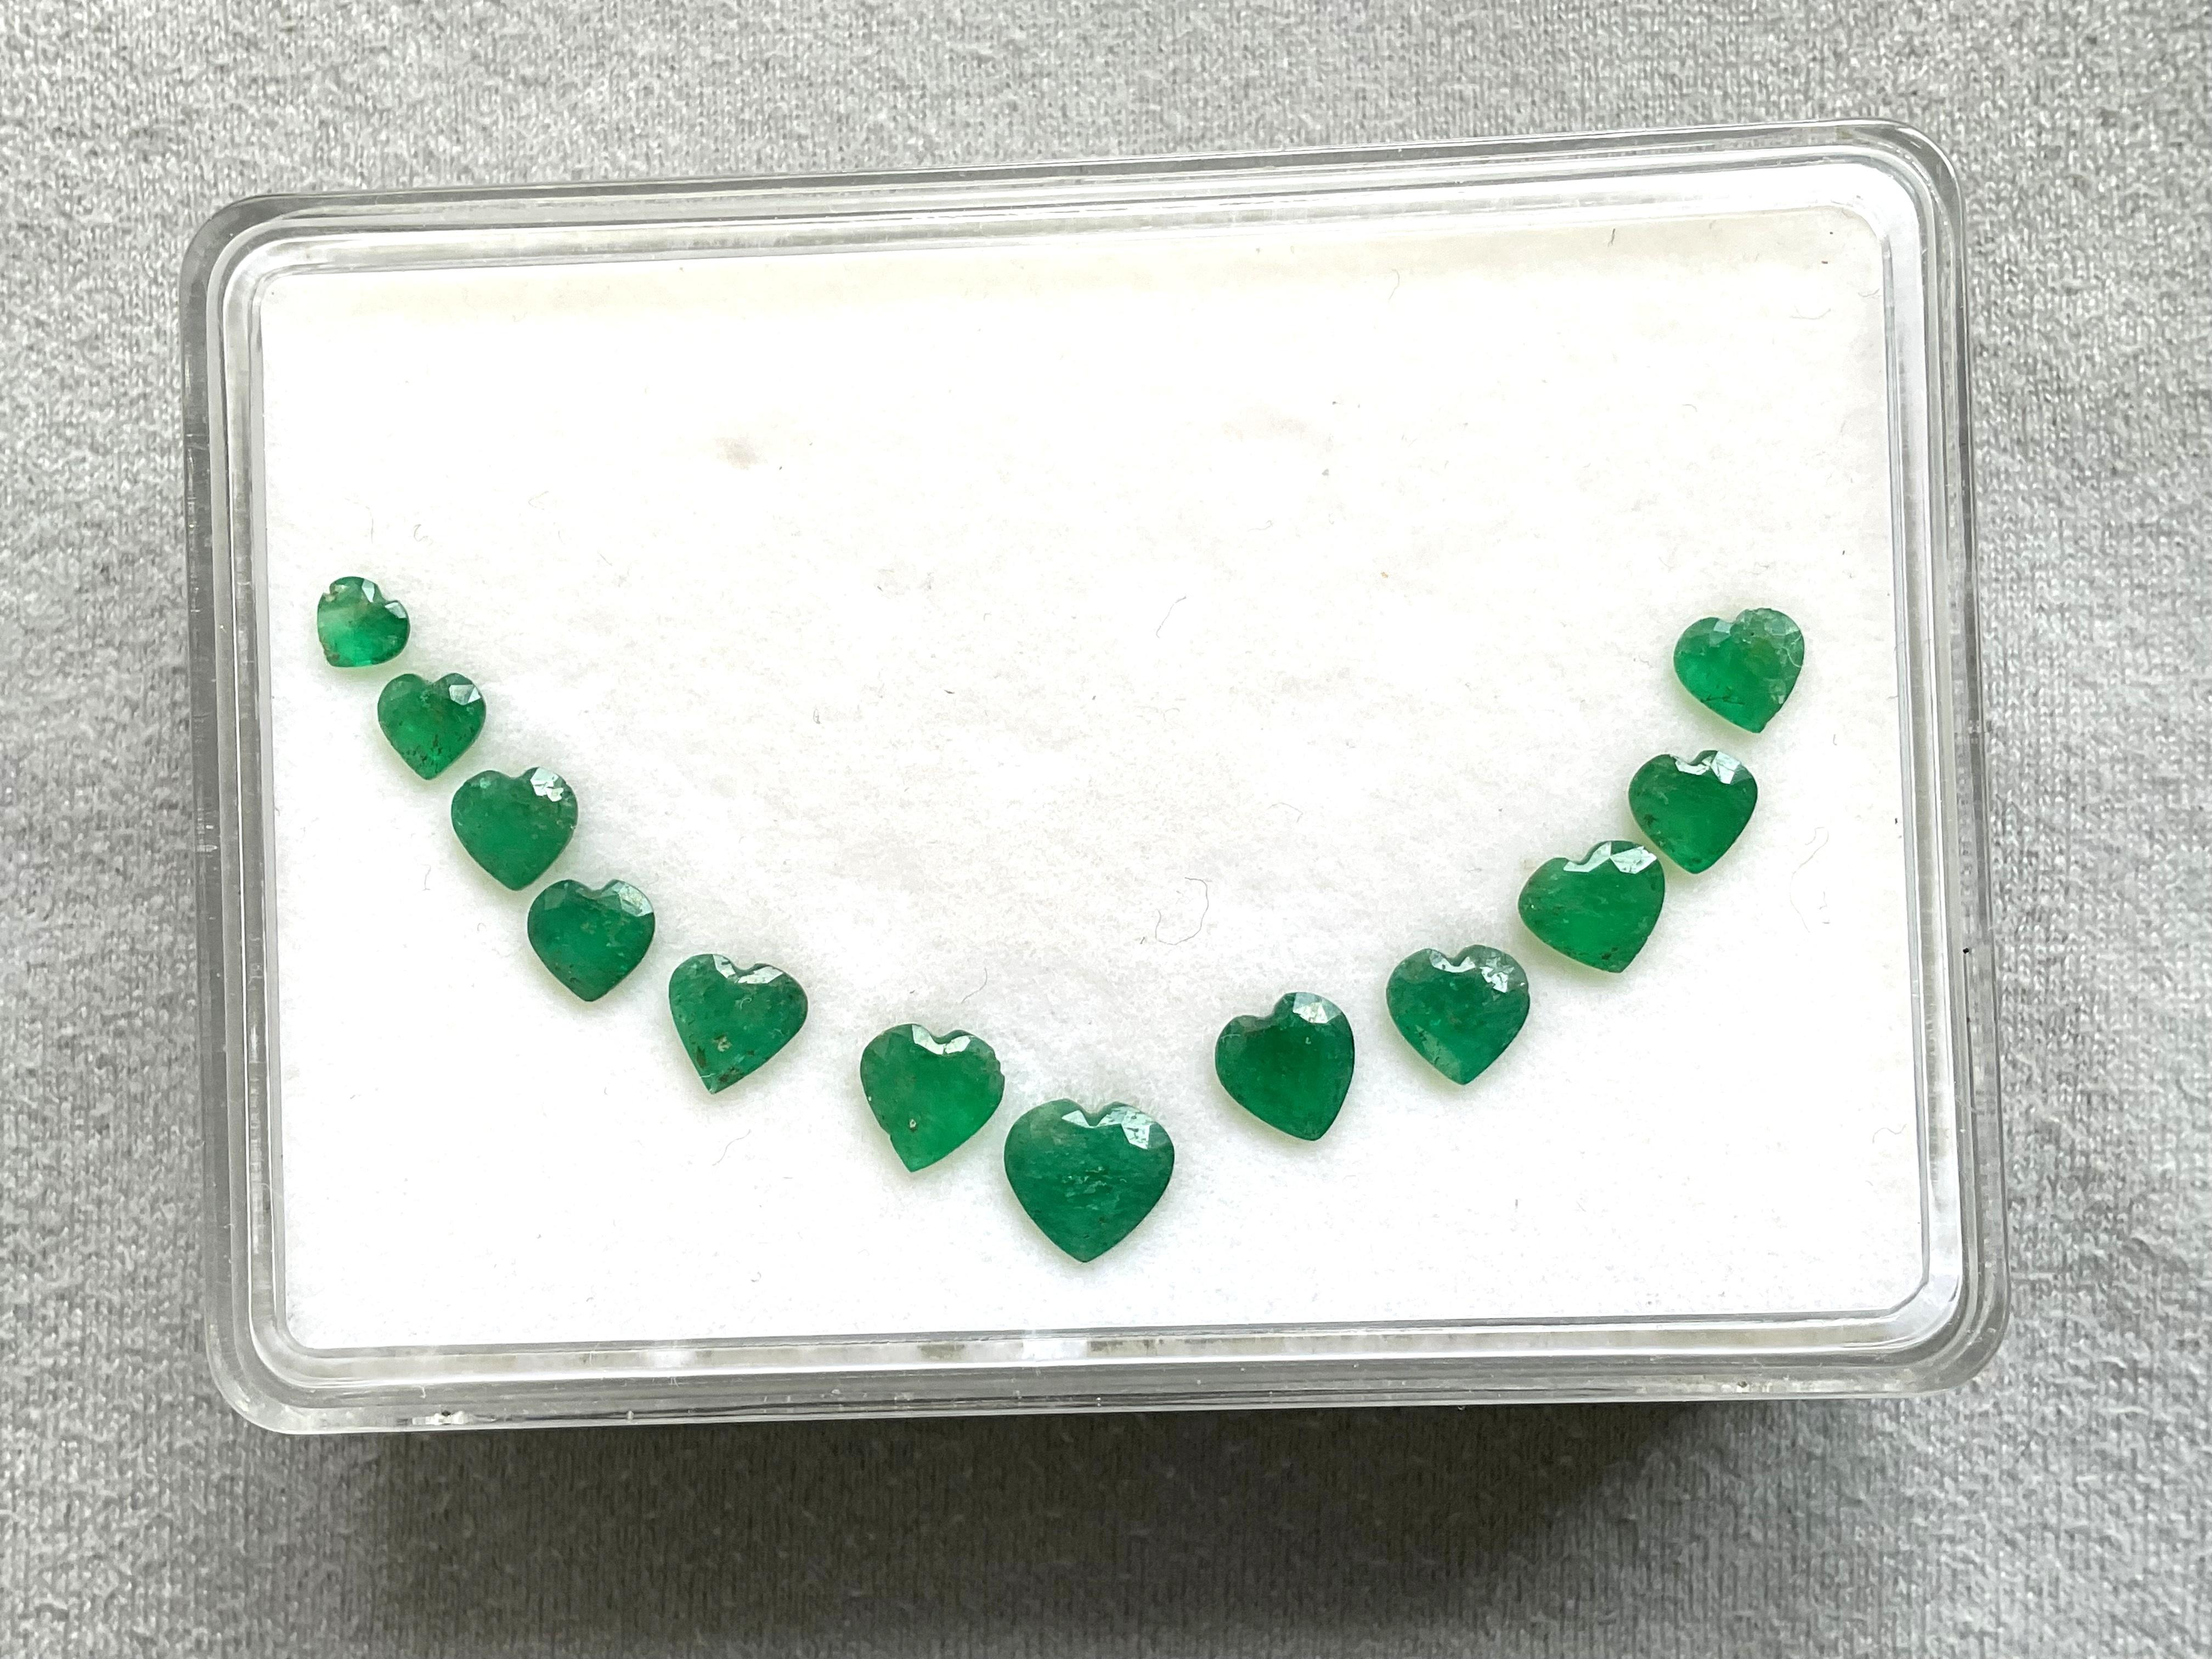 Women's or Men's Colombian Emerald Heart Layout 7.65 Carats Cutstone For Jewellery Natural Gems For Sale